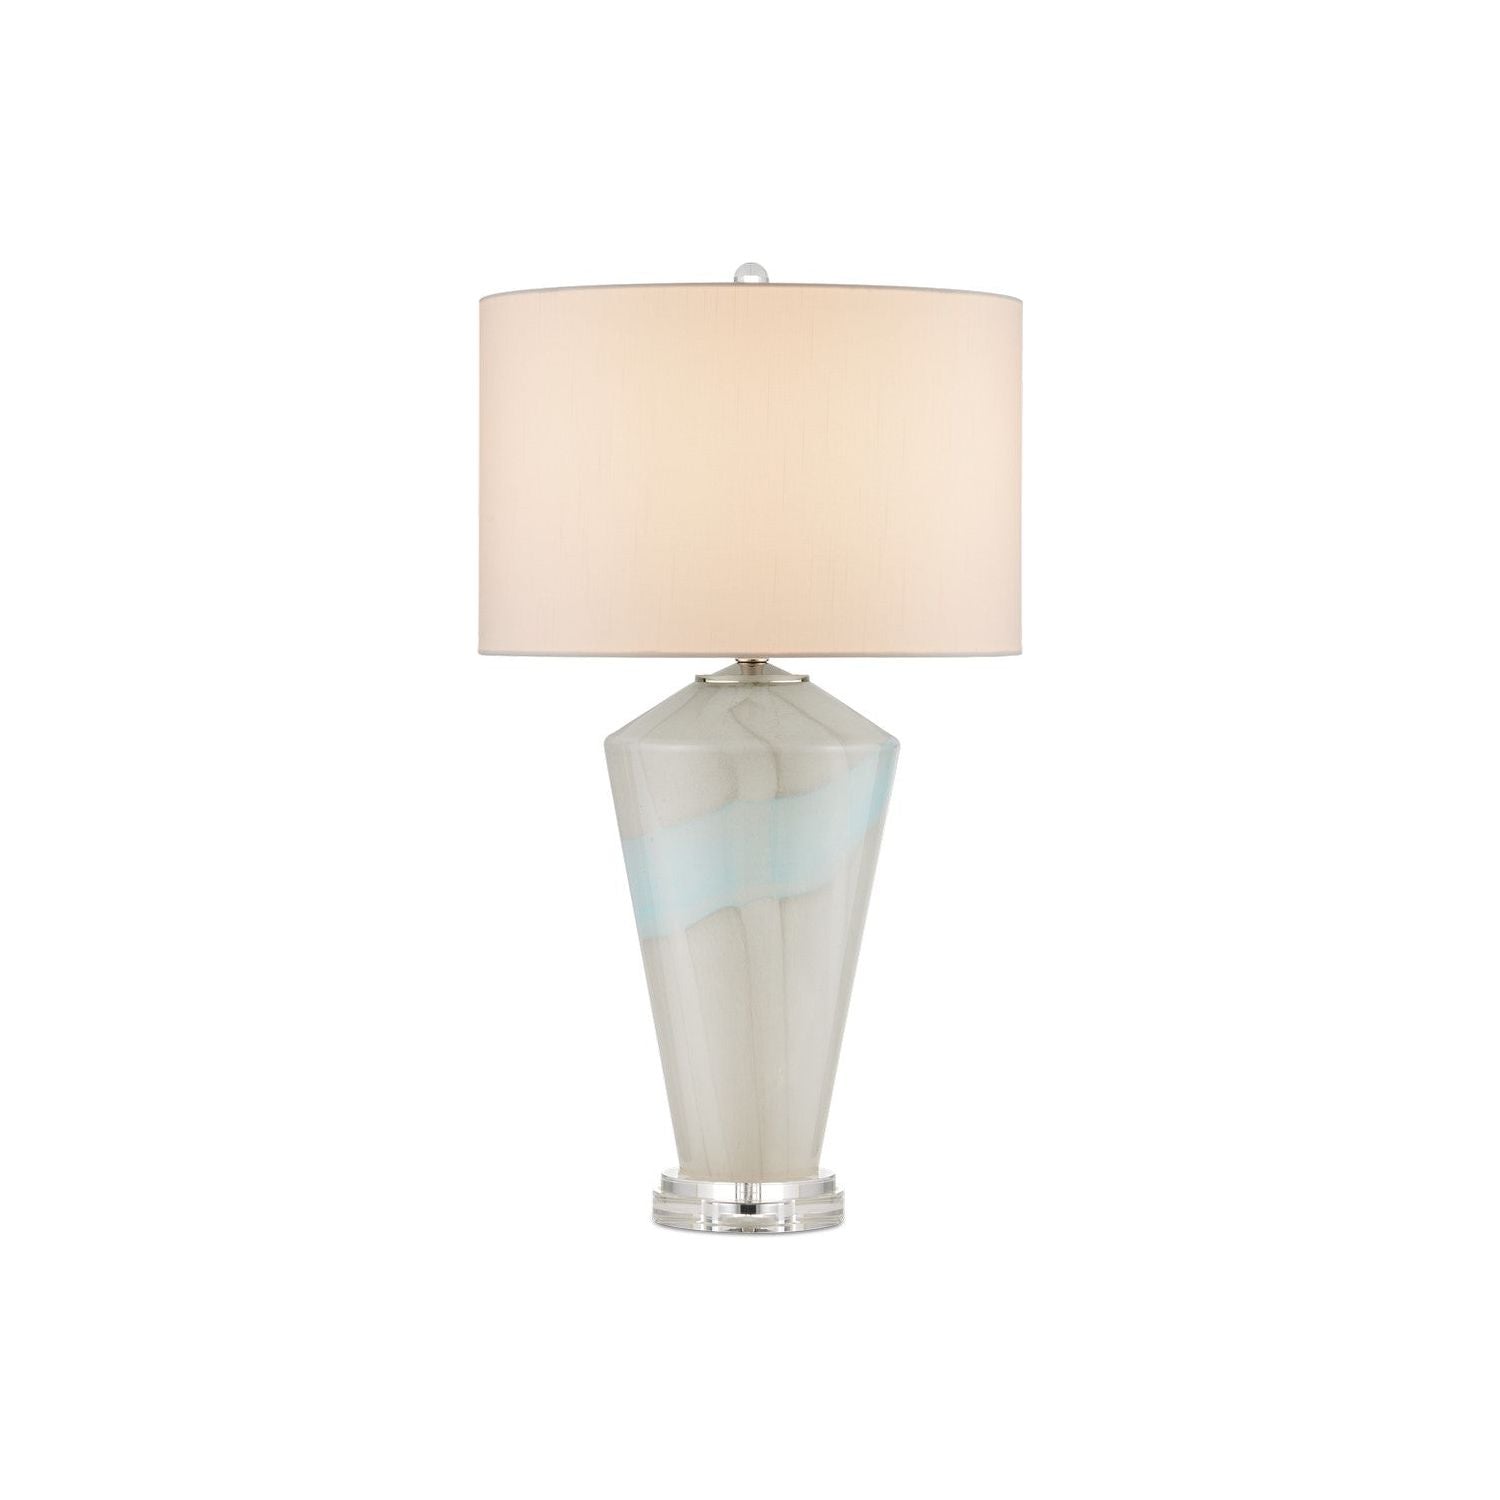 Currey and Company - 6000-0934 - One Light Table Lamp - Pale Gray/Light Blue/Clear/Polished Nickel